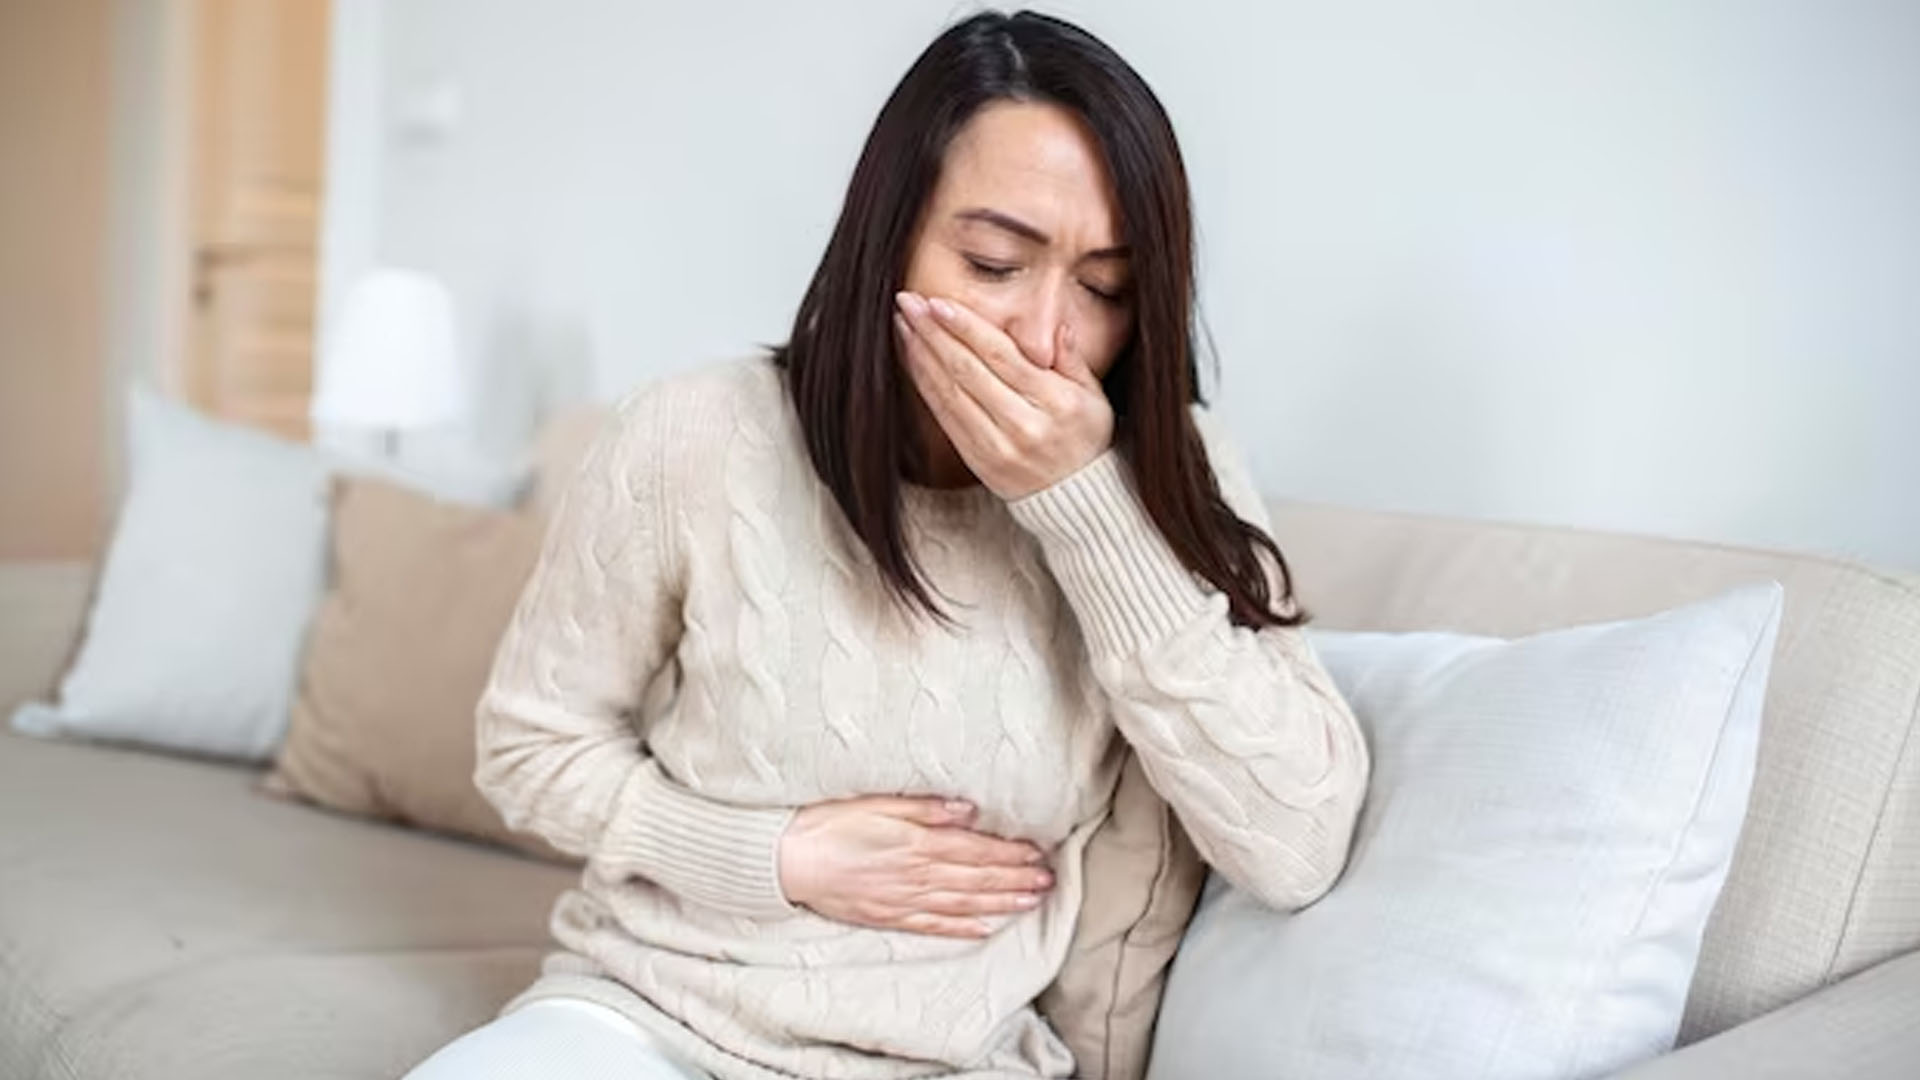 What are the Home Remedies for Nausea?